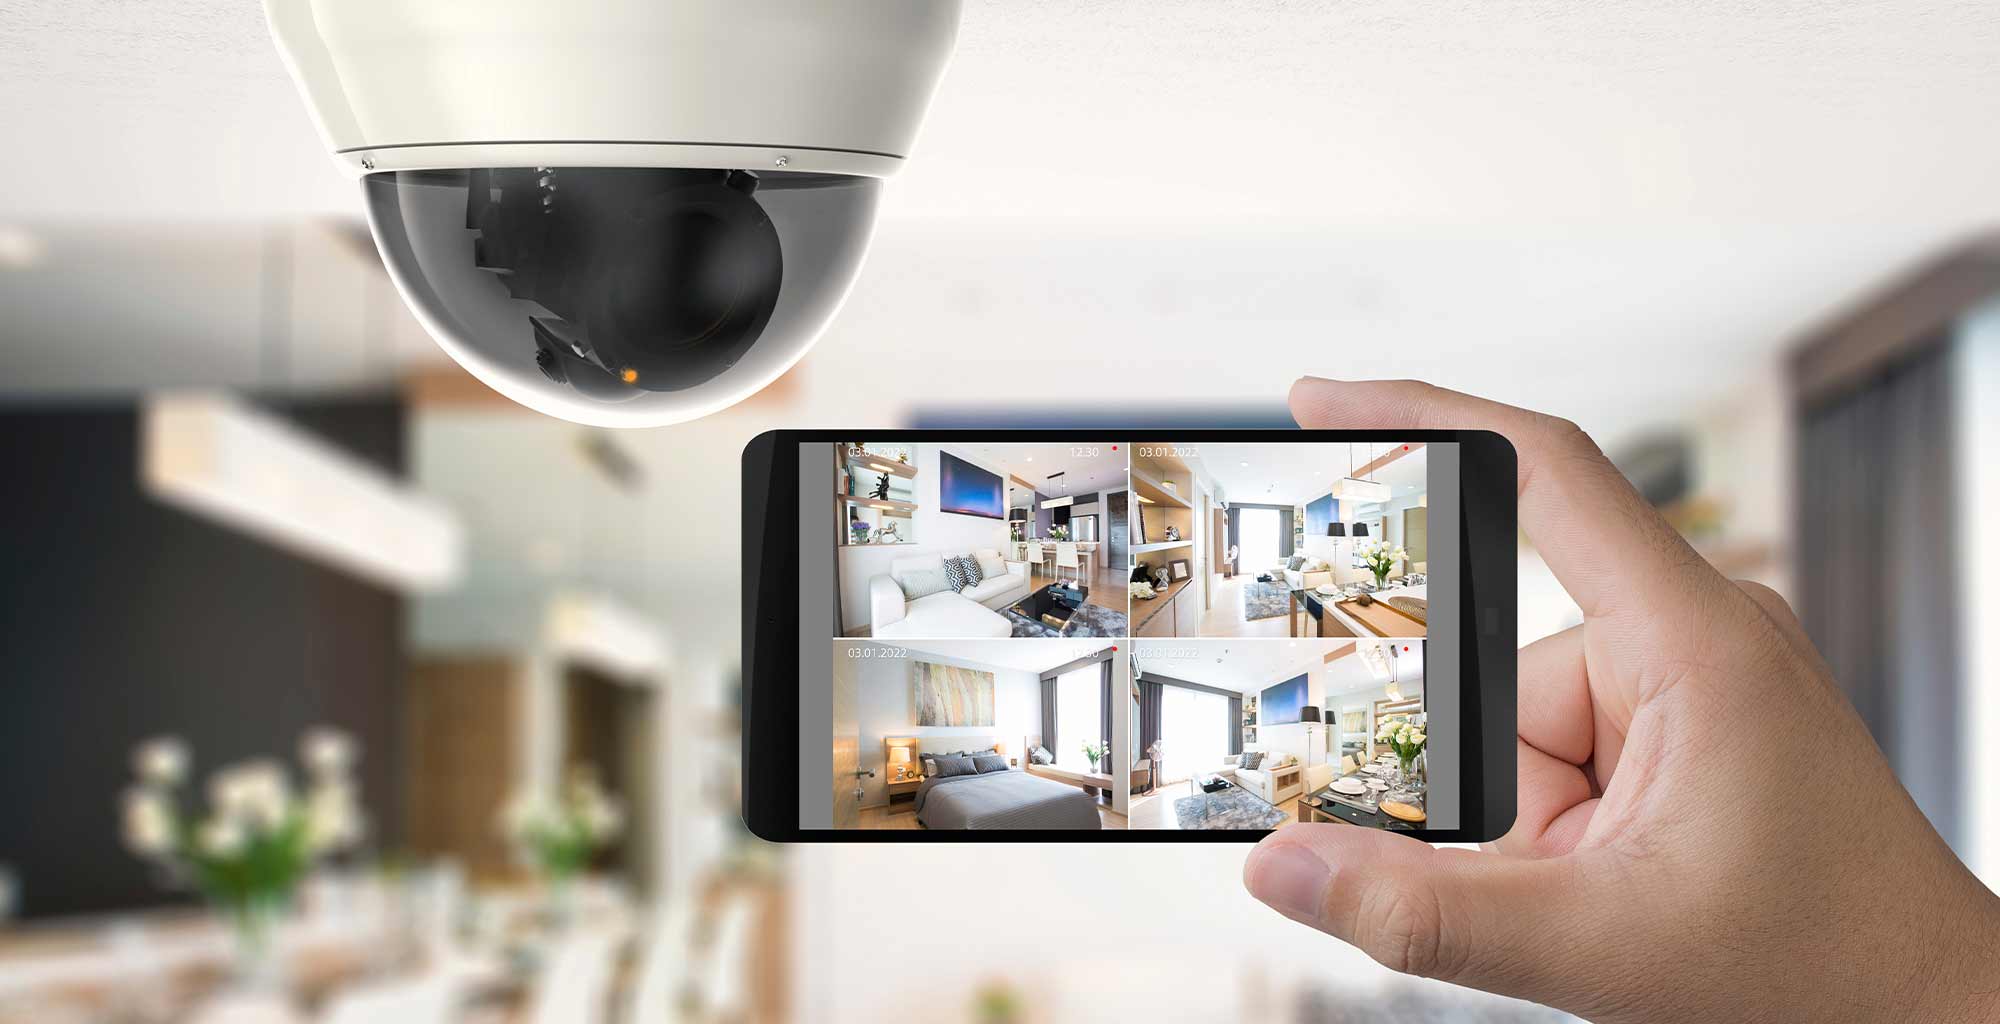 Are smart security cameras worth installing?